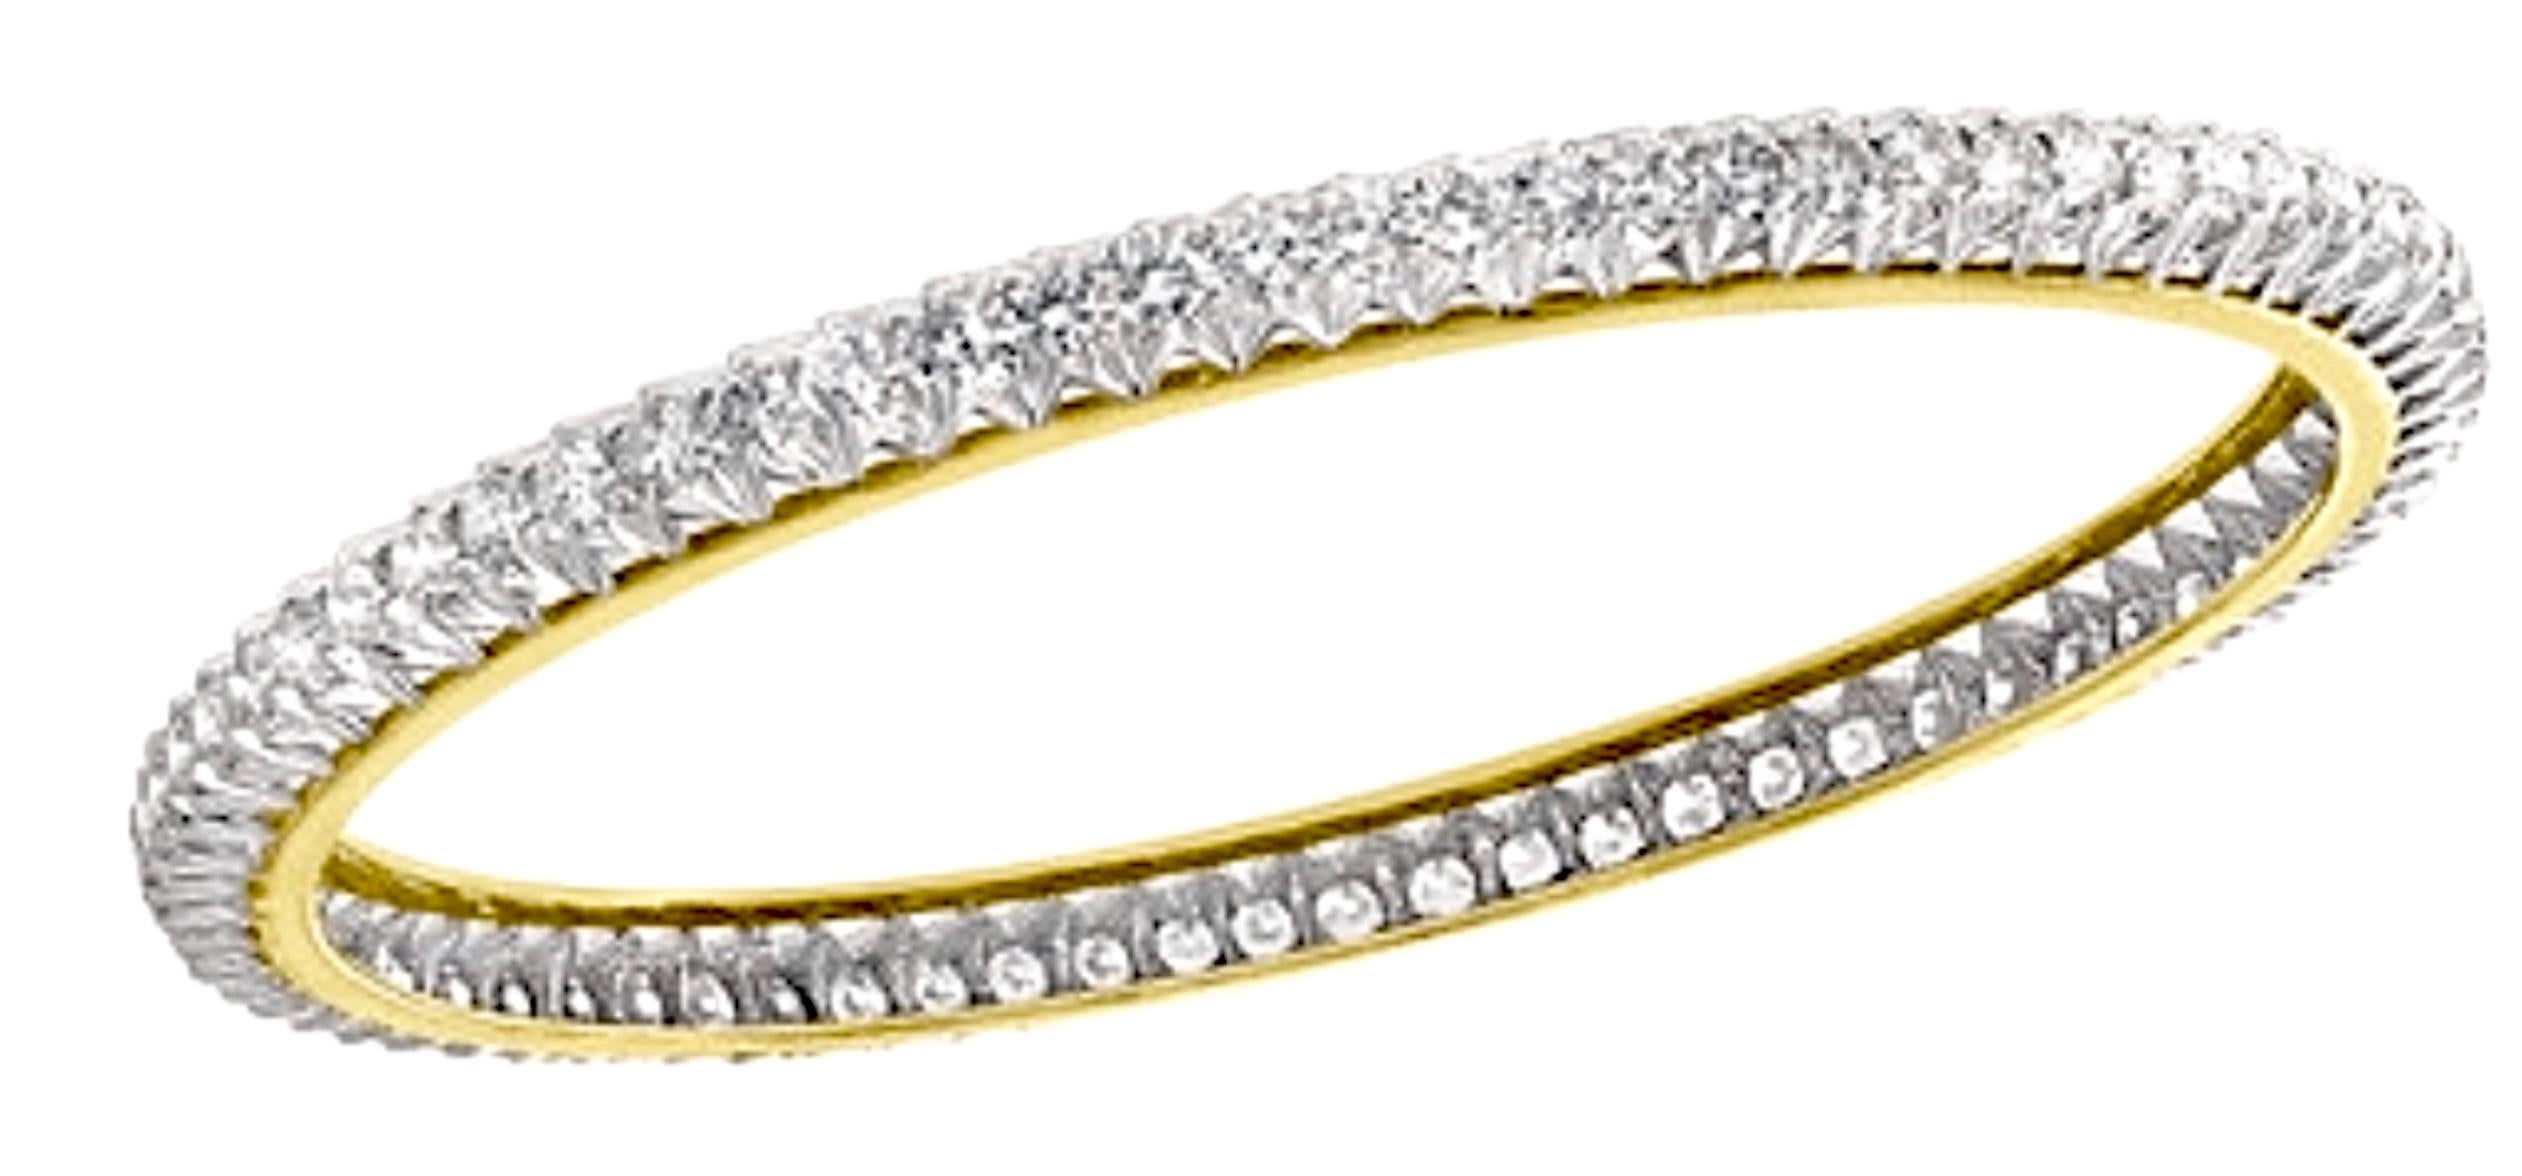 Single line 11.25  Ct Contemporary  18 K Yellow  Gold & Diamond Eternity  Bangle Pair
It features Two  bangles  crafted from  18k Yellow gold   embedded with  11.25 Carats of  Round brilliant diamonds in two bangles . 
These are slide on